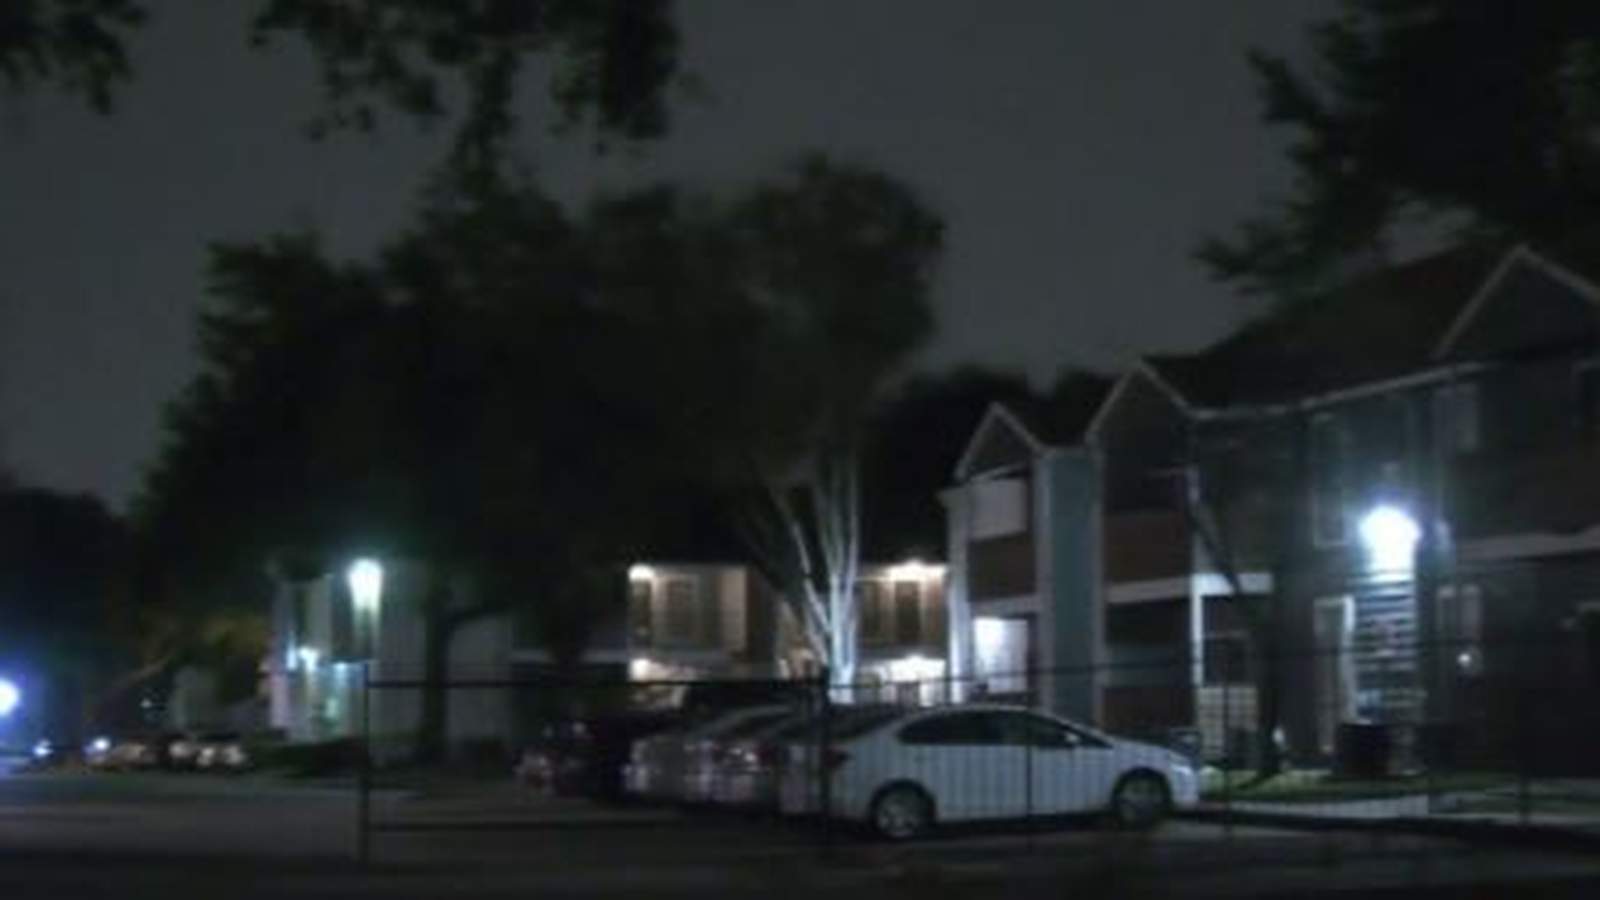 Woman stabbed to death at apartment complex in west Houston, police say